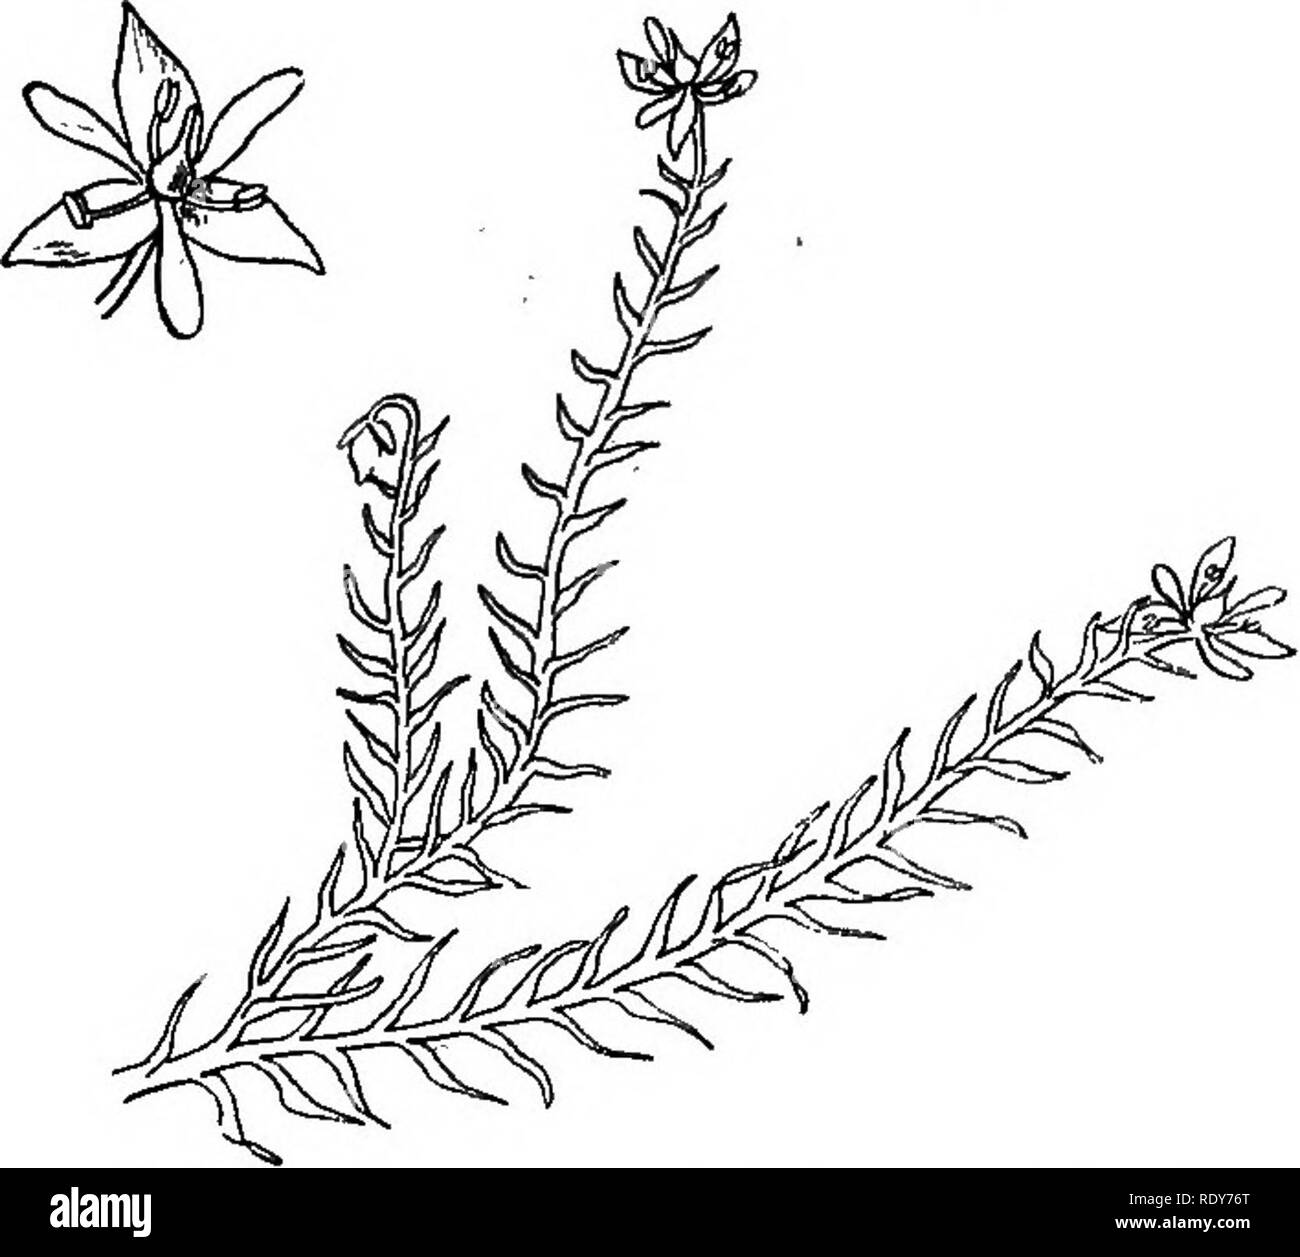 . The families of flowering plants. Plants; Phanerogams. FAMILIES OF FLOWERING PLANTS. 41. Fig. 36.—Mayaoa {Mayaca MichauuM) showing plant ot natural size, and enlarged flower. Original. tufted herbs with slender, grass-like stems, terminated by a dense spike composed of brownish scales or bracts, from the axils of which appear a few small, evanescent, bright yellow flow- ers. The structure of the sepals and pistal is most beauti- ful, but very complicated, and it can be studied advantageous- ly only by a botanist. The stems are frequently twisted like a corkscrew, whence one of the species is Stock Photo